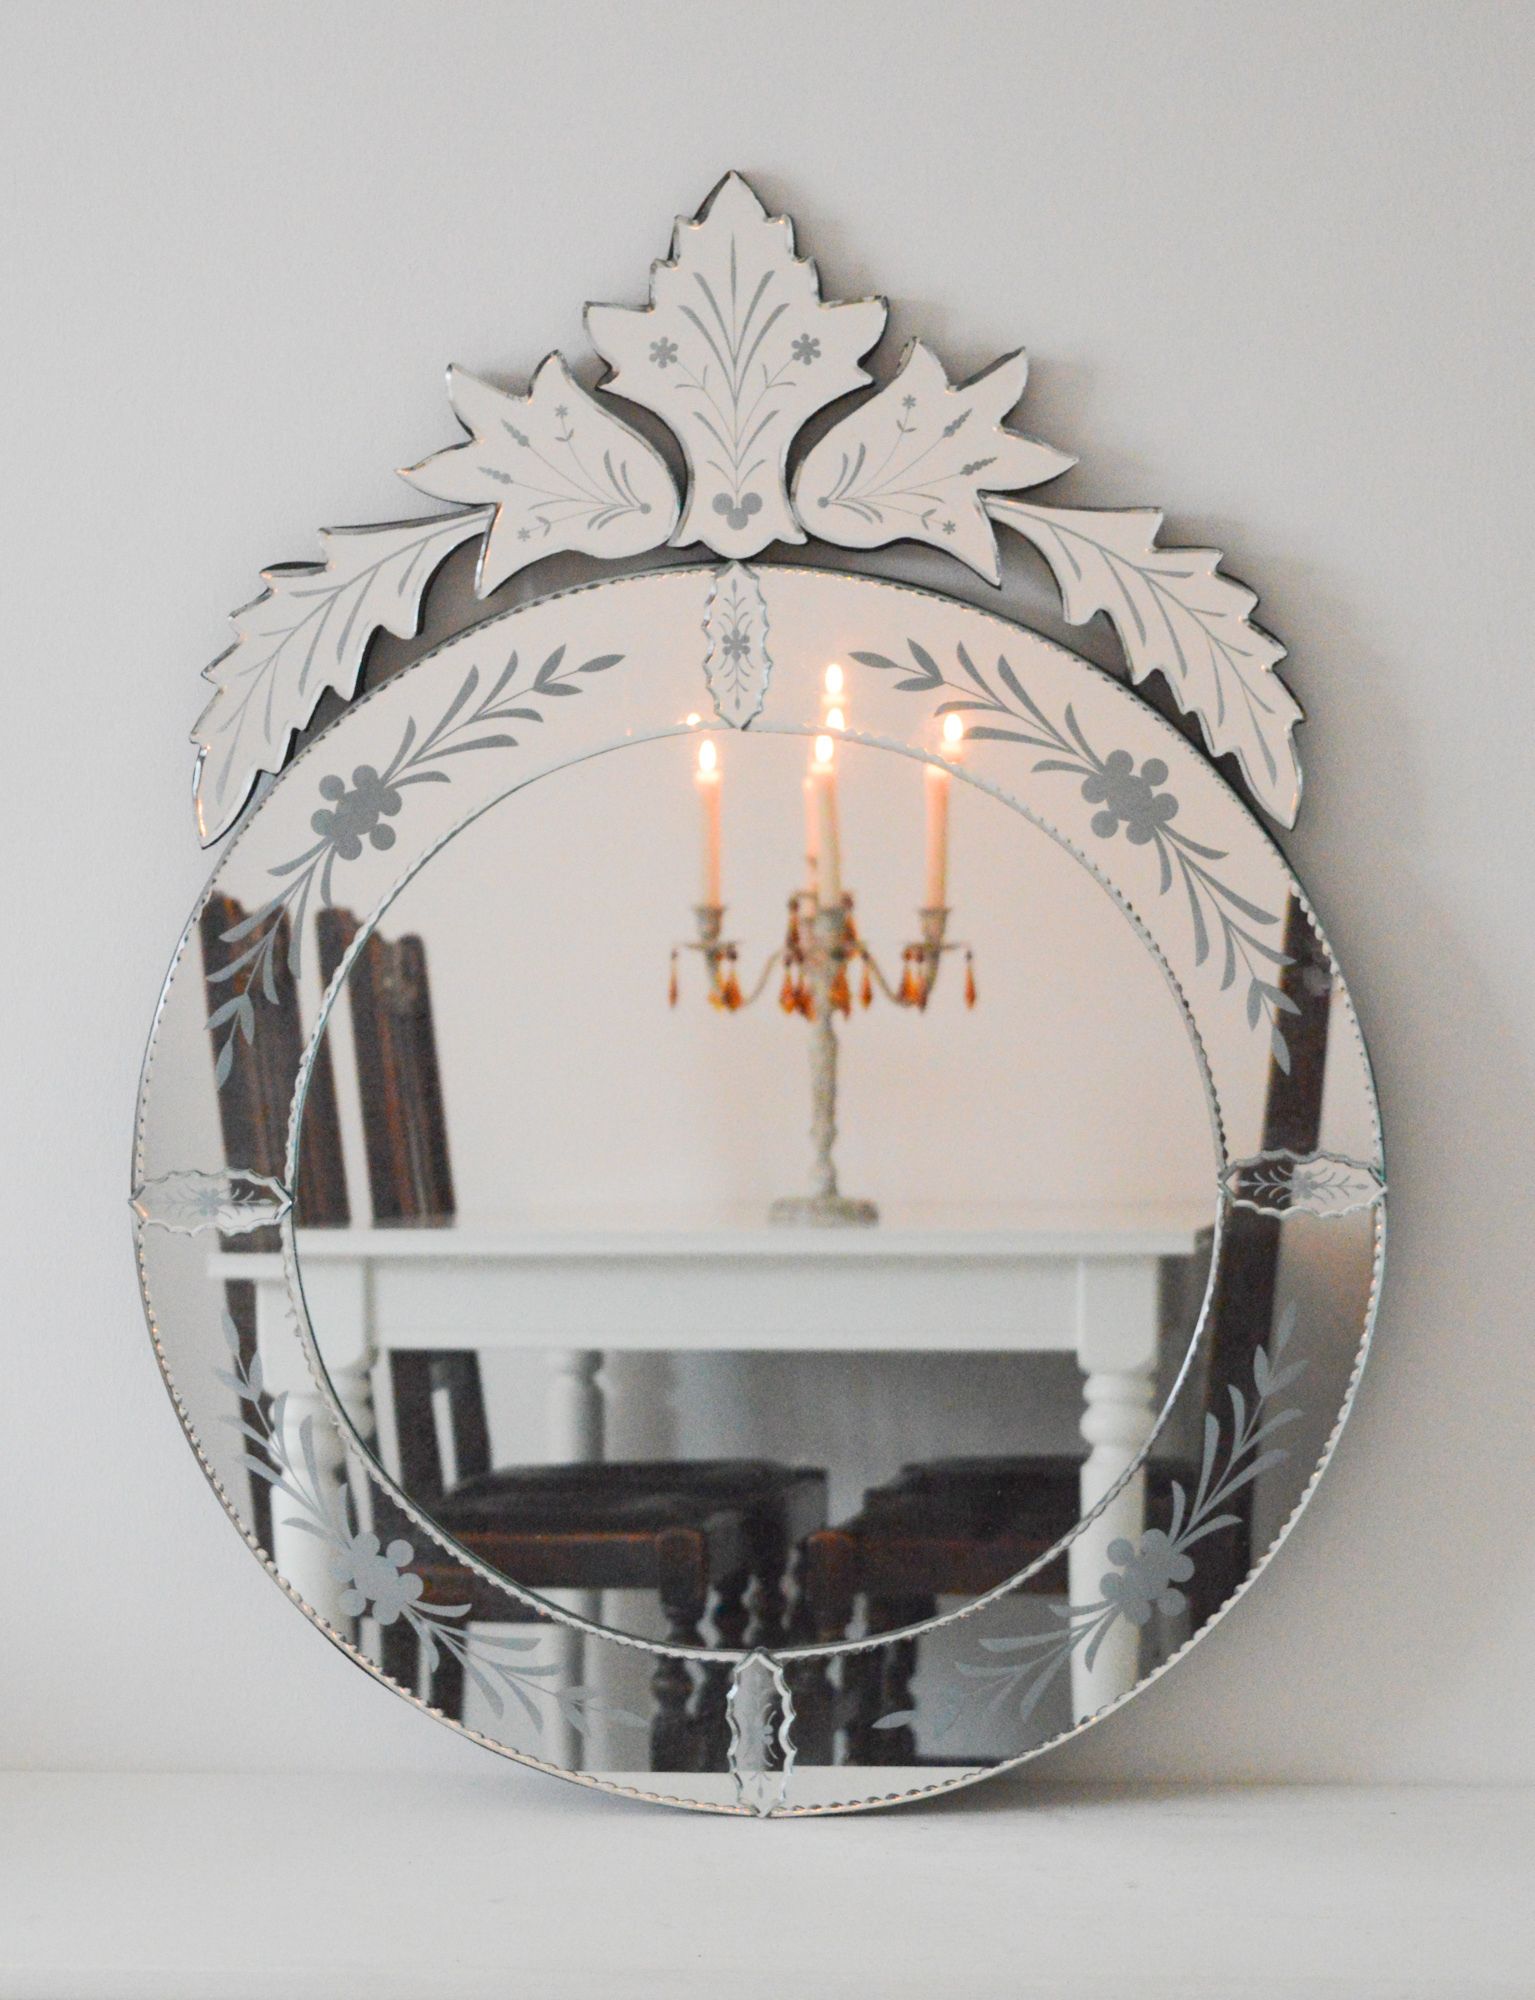 Vintage Venetian Style Wall Mirror, Large Round Decorative Mirror Inside Tellier Accent Wall Mirrors (Photo 4 of 15)